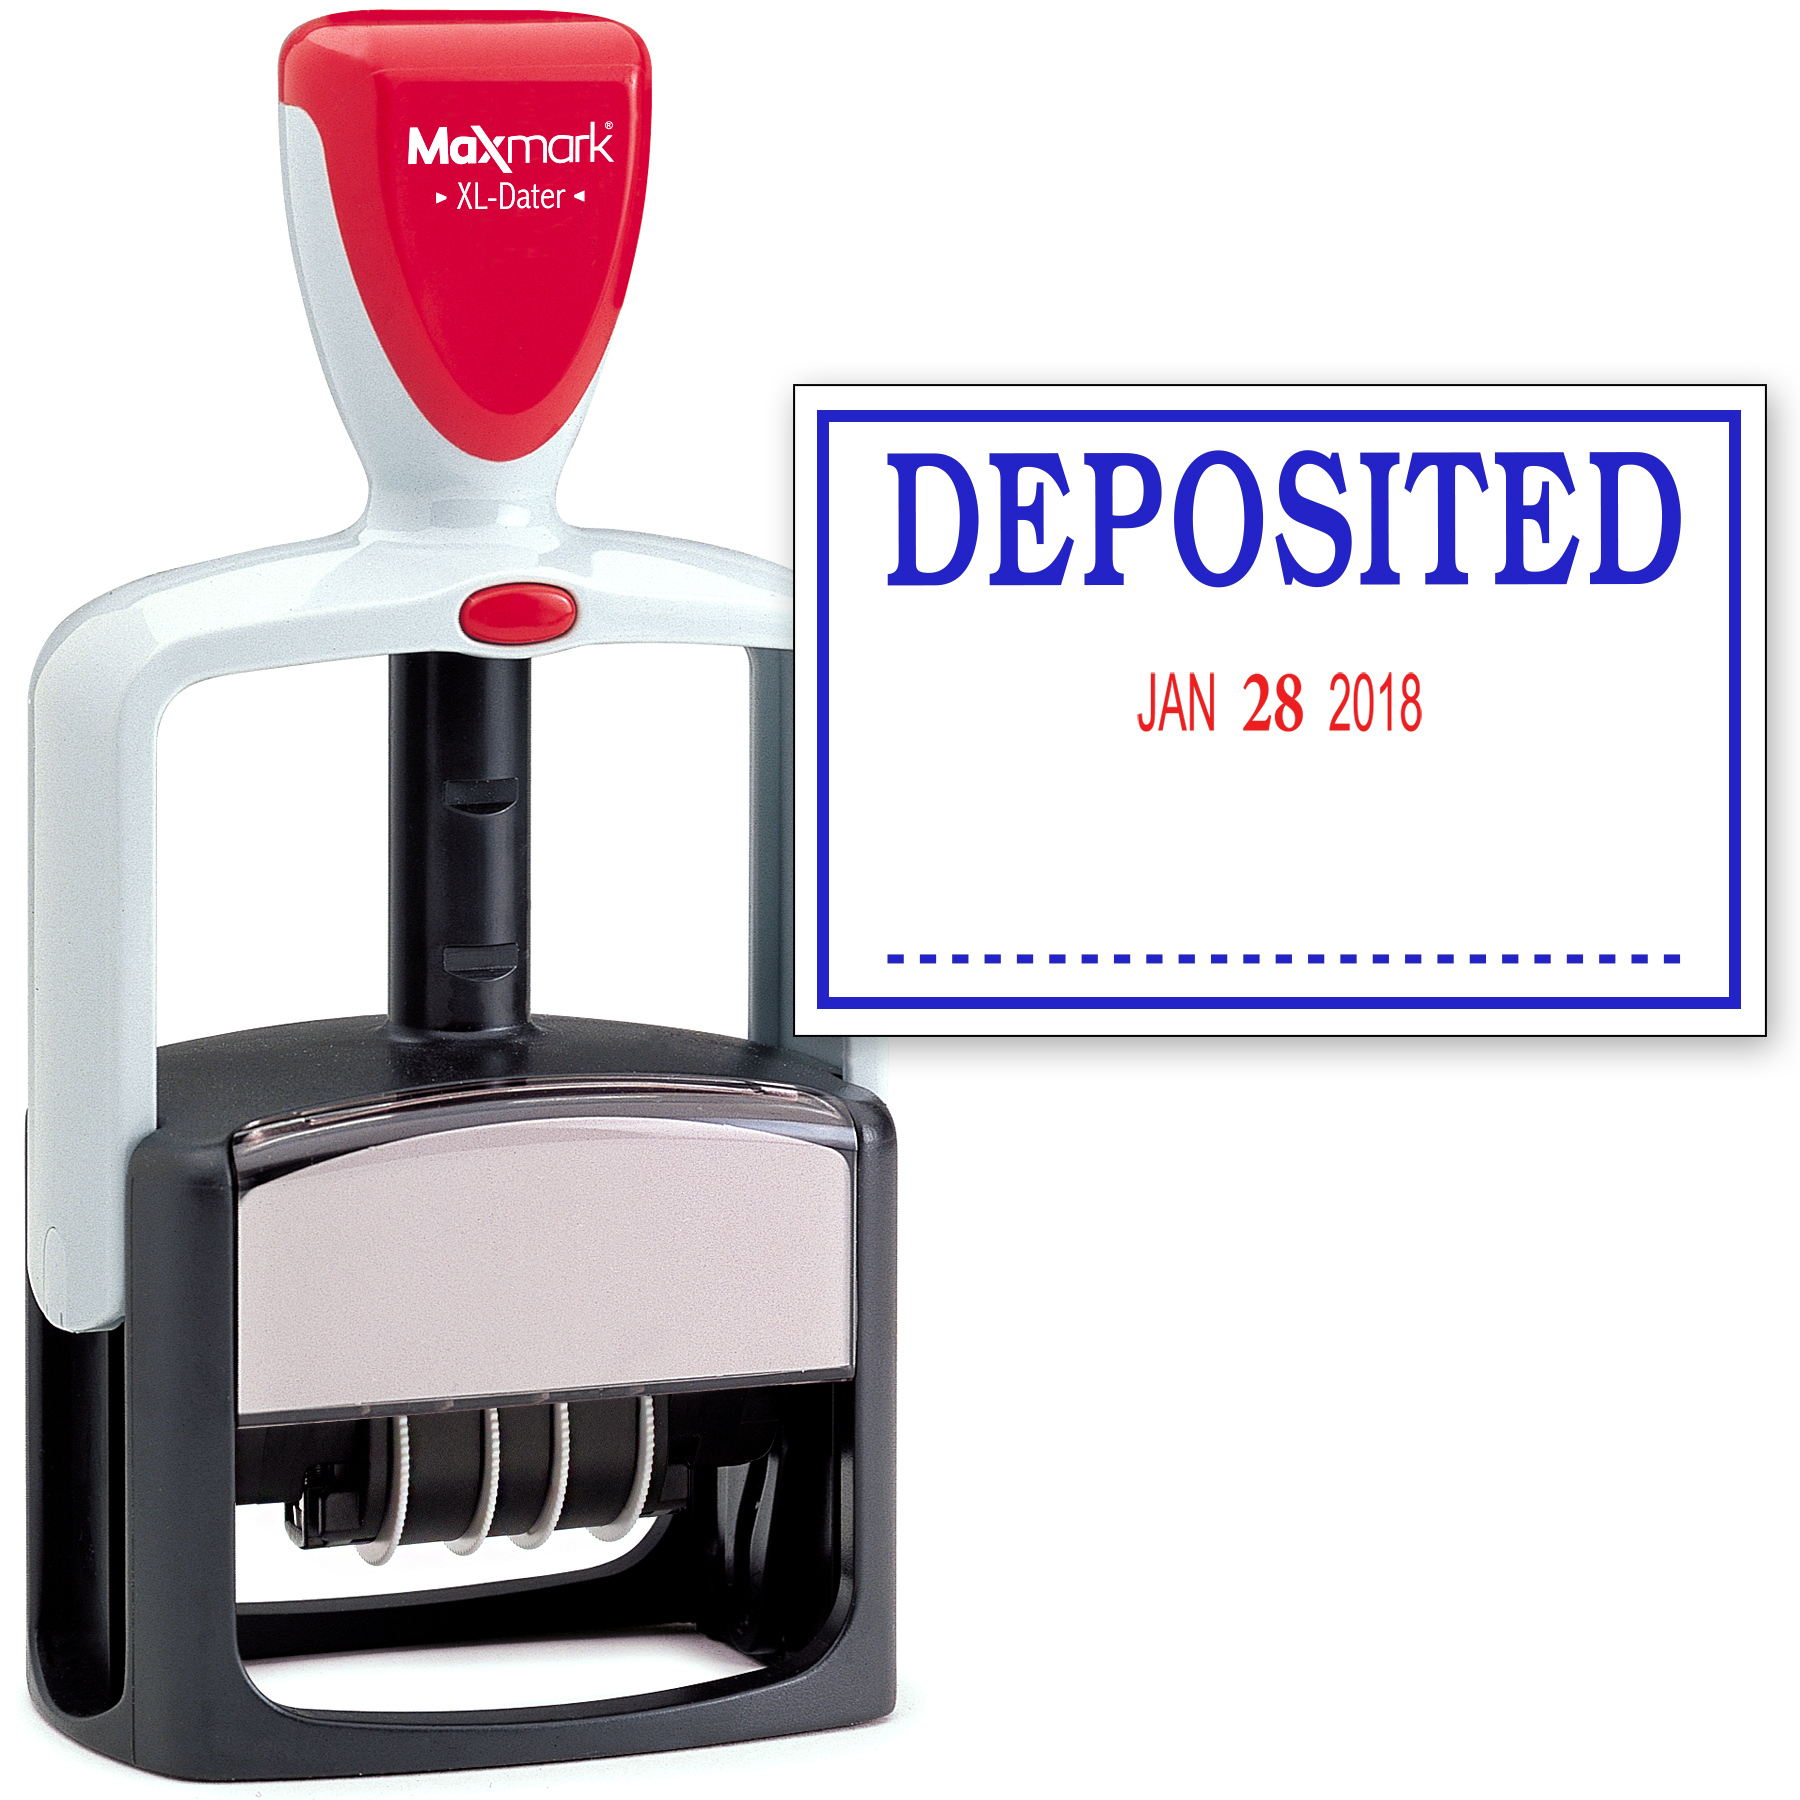 2000 PLUS Heavy Duty Style 2-Color Date Stamp with DEPOSITED self inking stamp - Blue/Red Ink